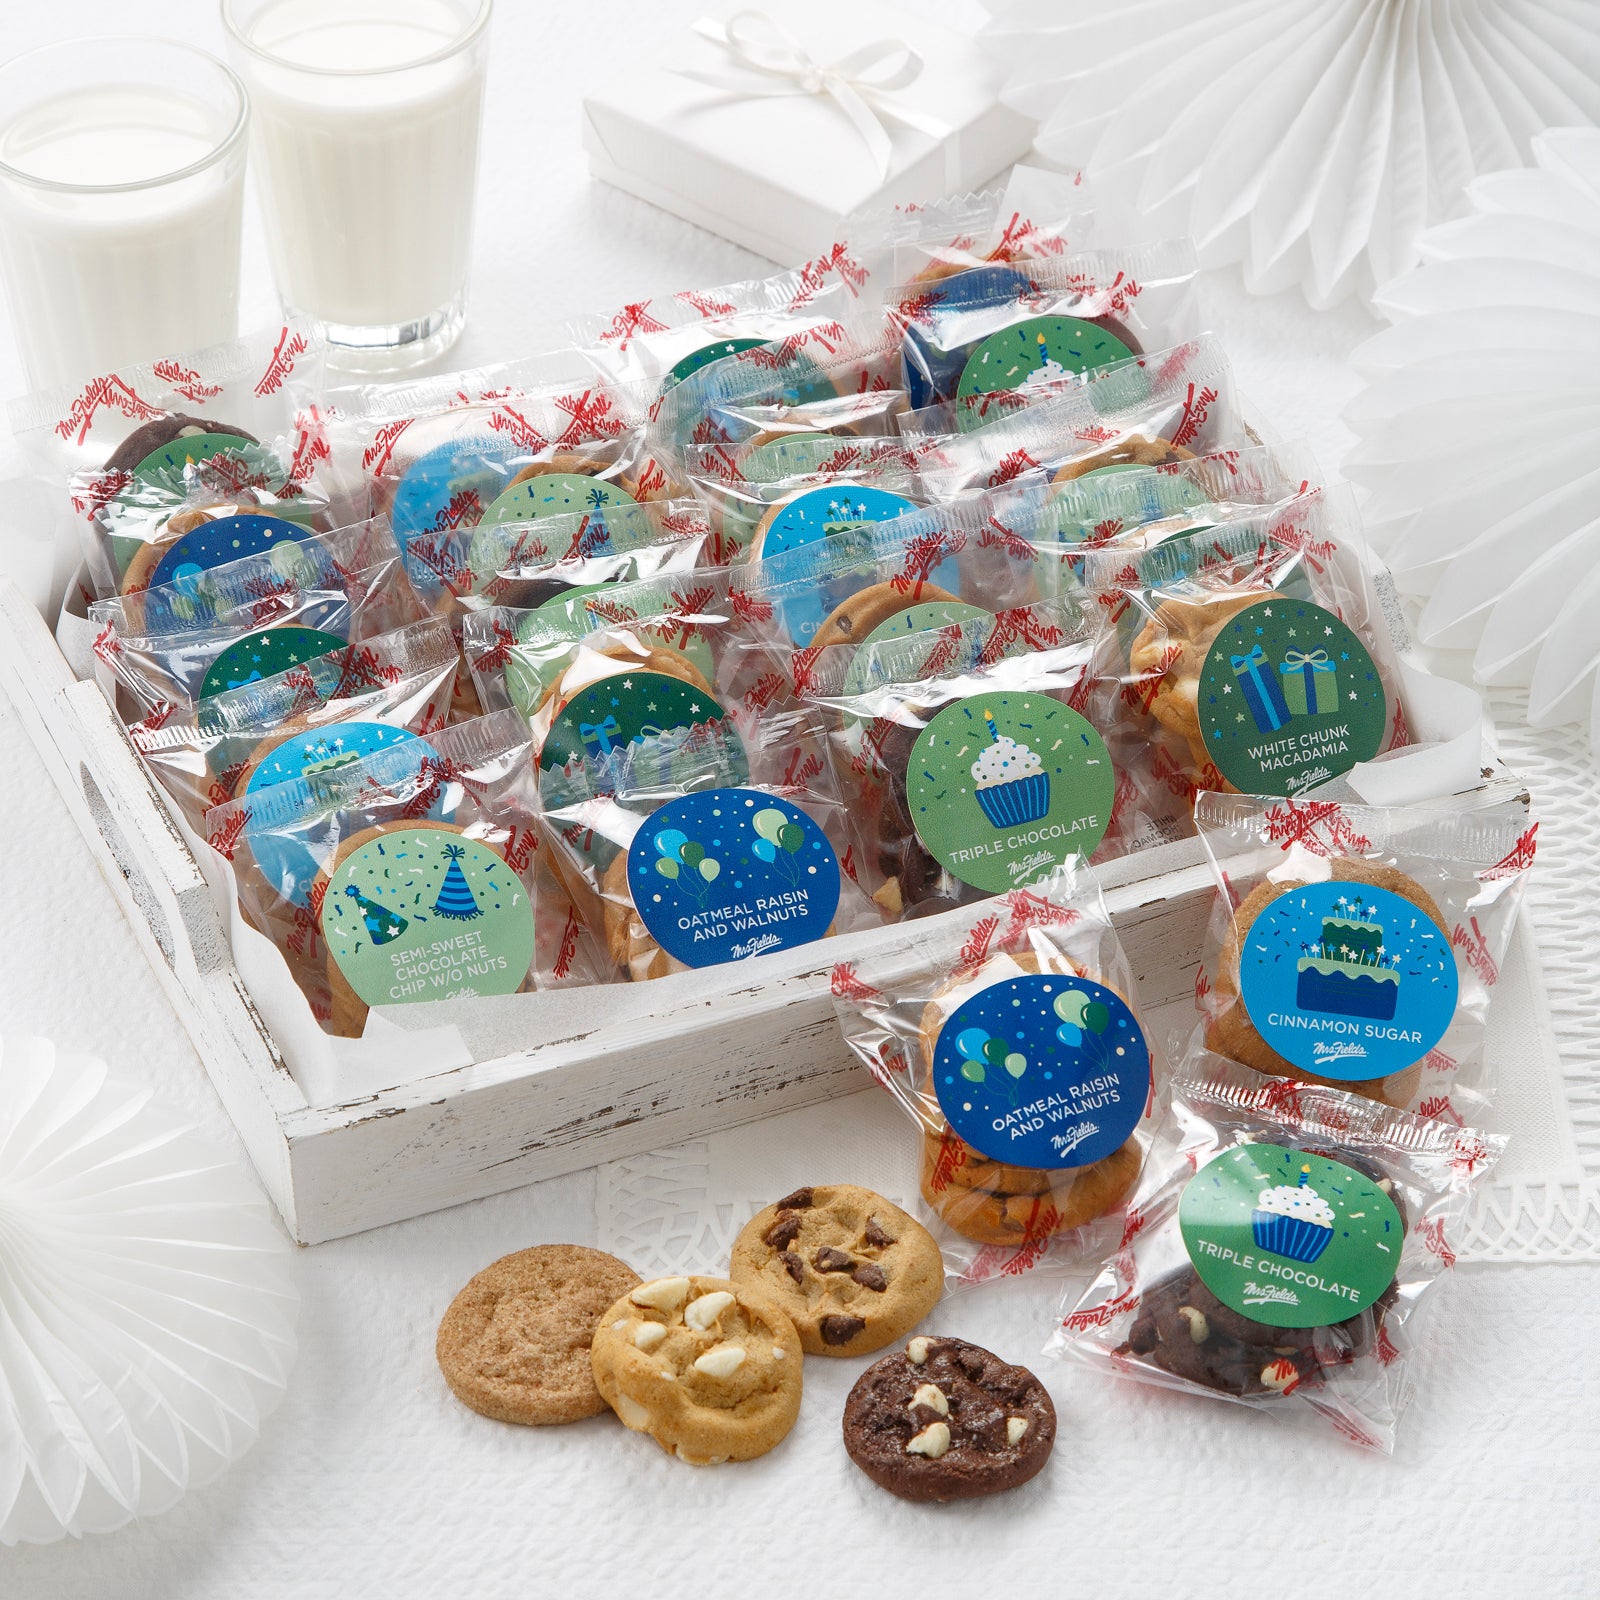 An assortment of packaged nibblers with birthday themed stickers on each package